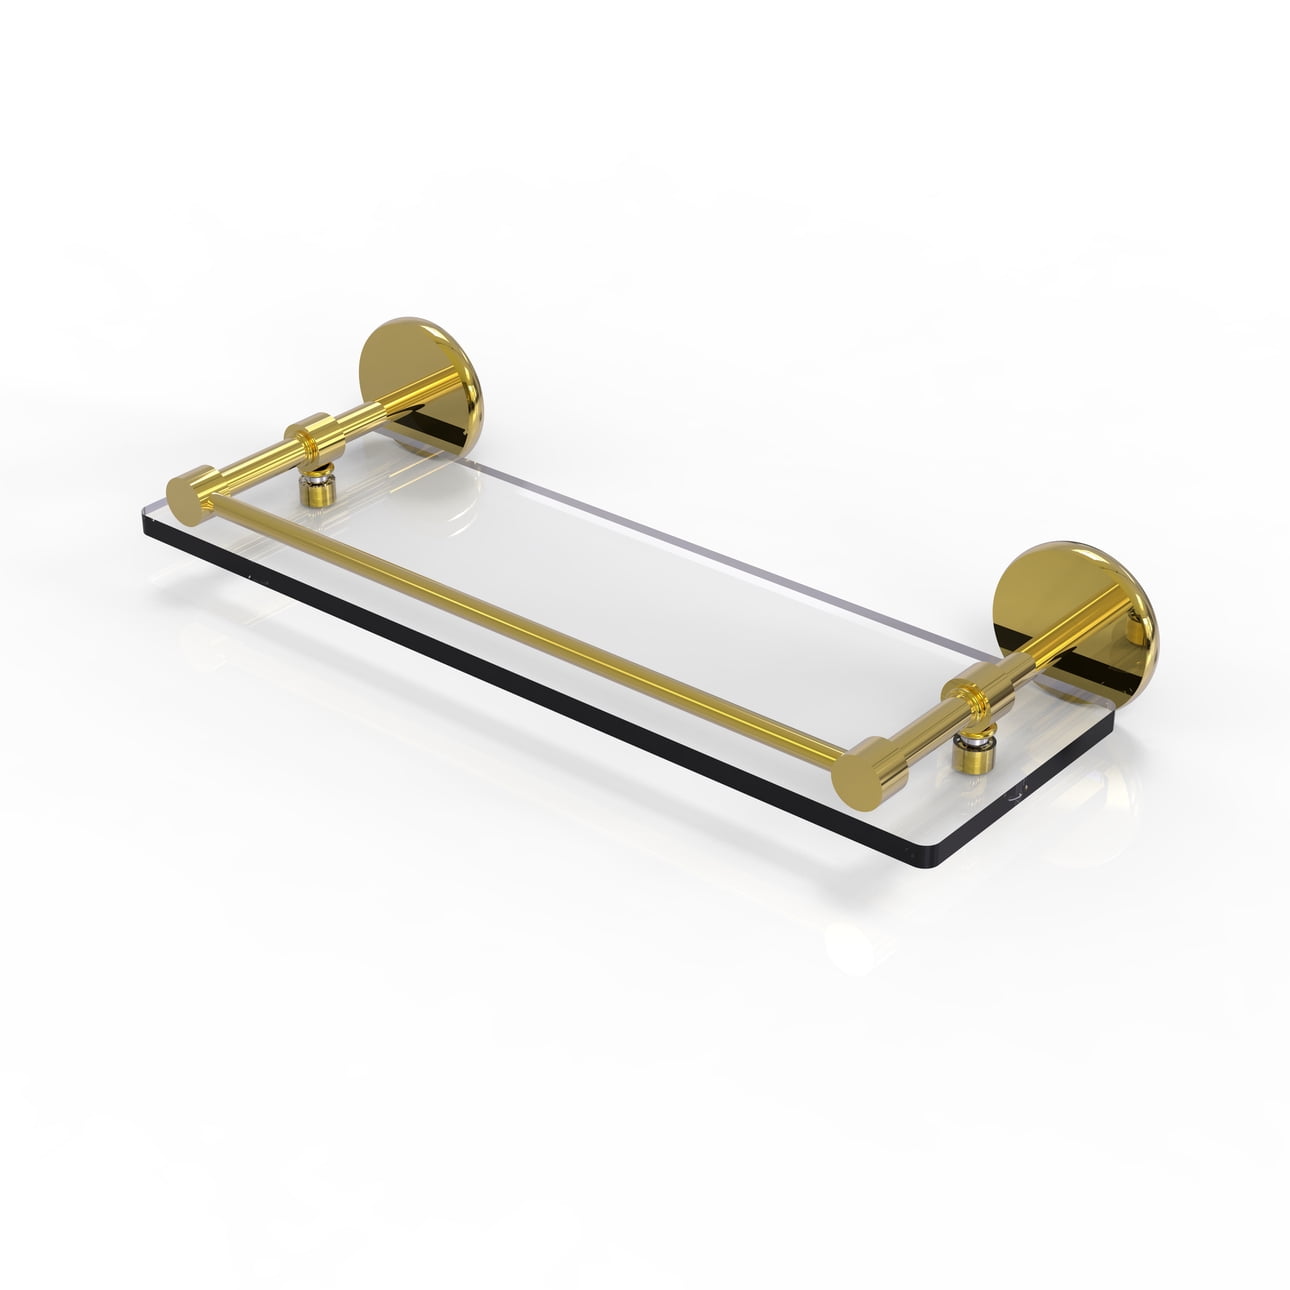 16-in Tempered Glass Shelf with Gallery Rail in Polished Brass 